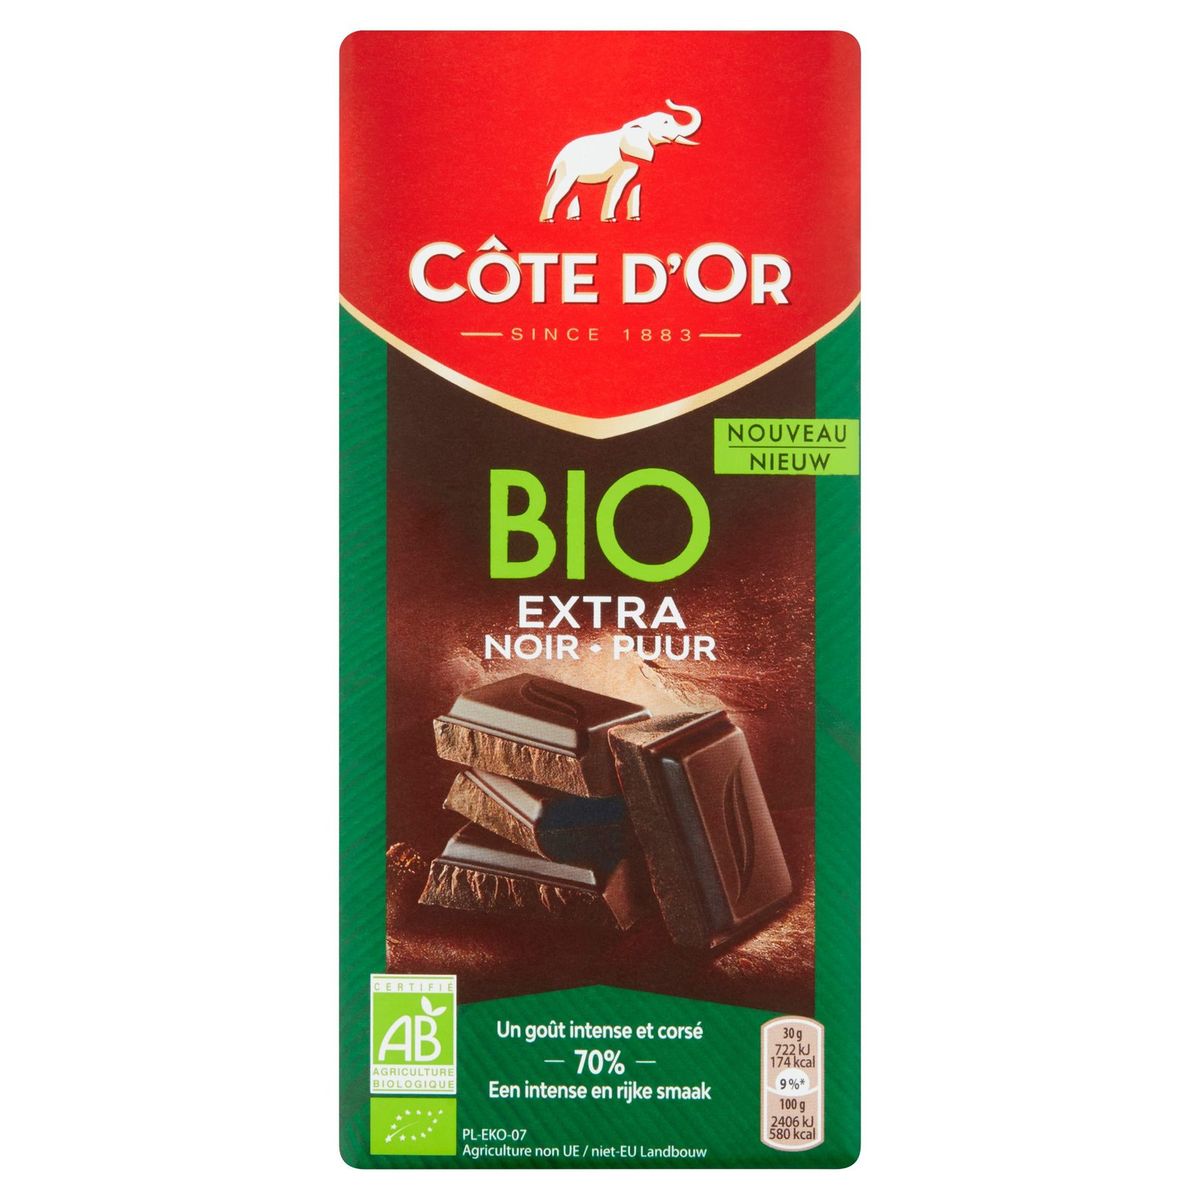 Côte d'Or BIO Pure Chocolade Tablet Extra Puur 70% 150 g